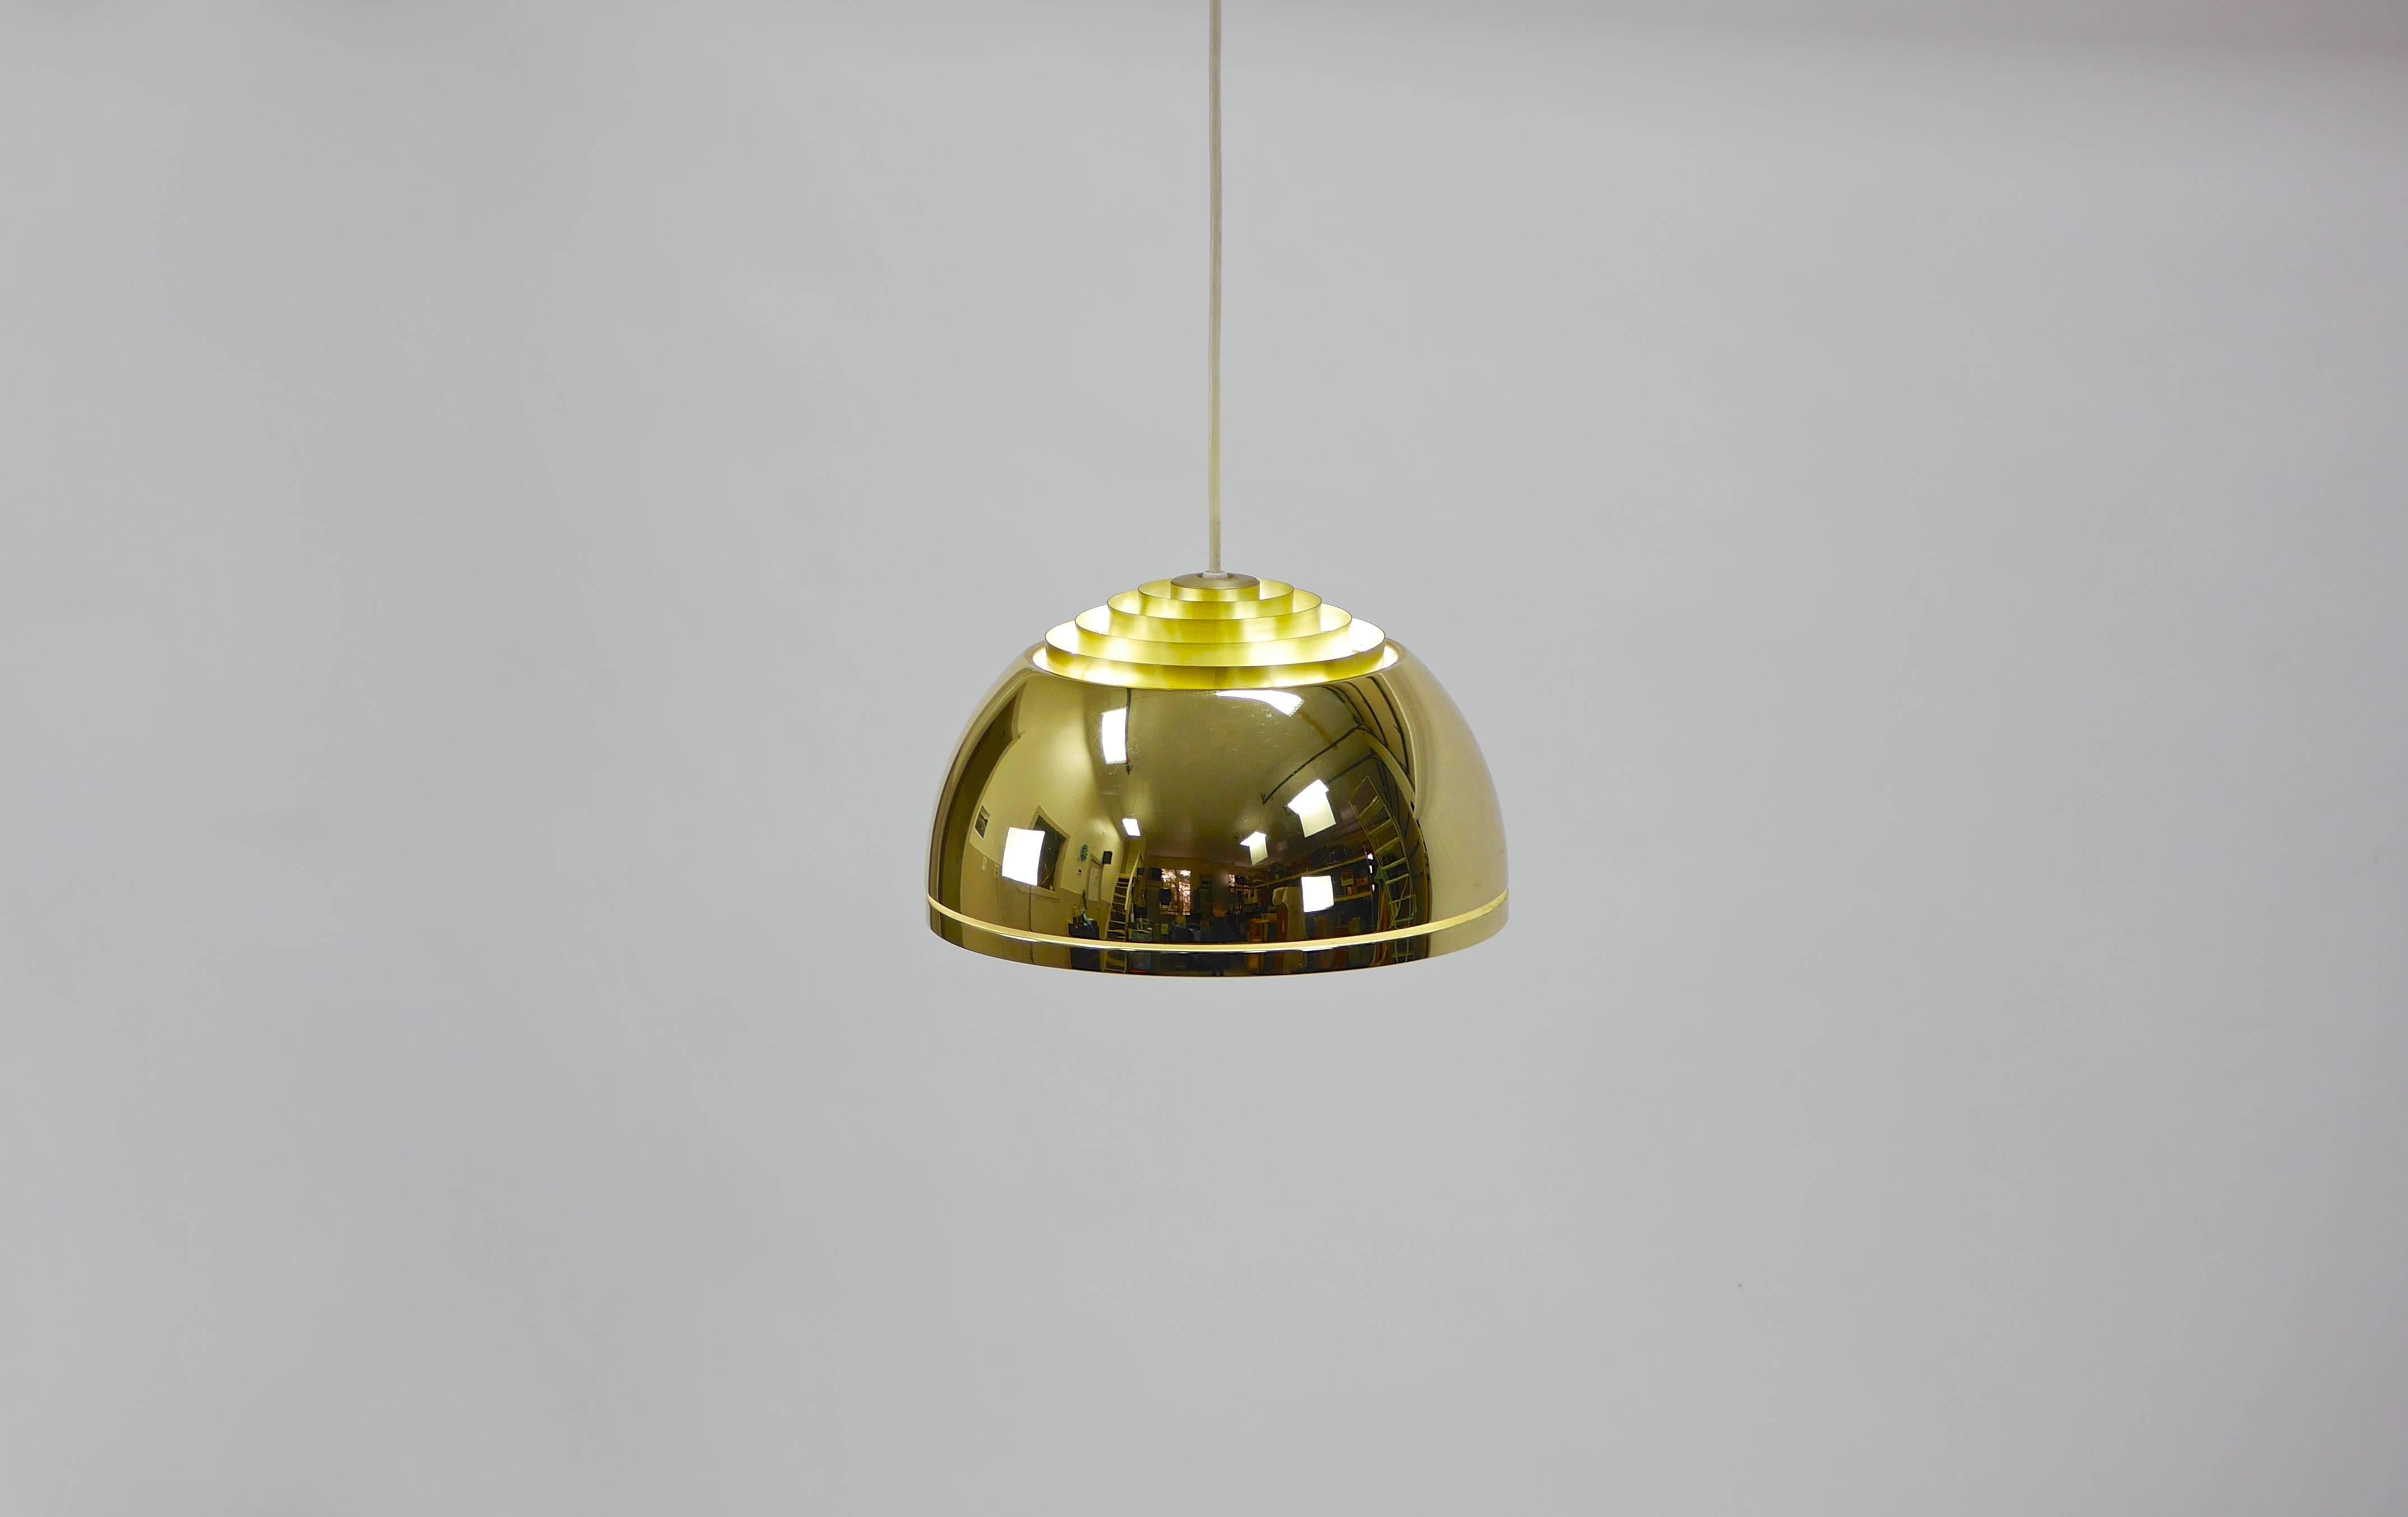 
A beautiful brass pendant light in the manner of Arne Jacobsen manufactured by Lightolier. Having five diffuser rings, a white enamel interior and a frosted glass diffuser.

Body-Brass.
Diffuser rings-brushed brass.
Interior-White